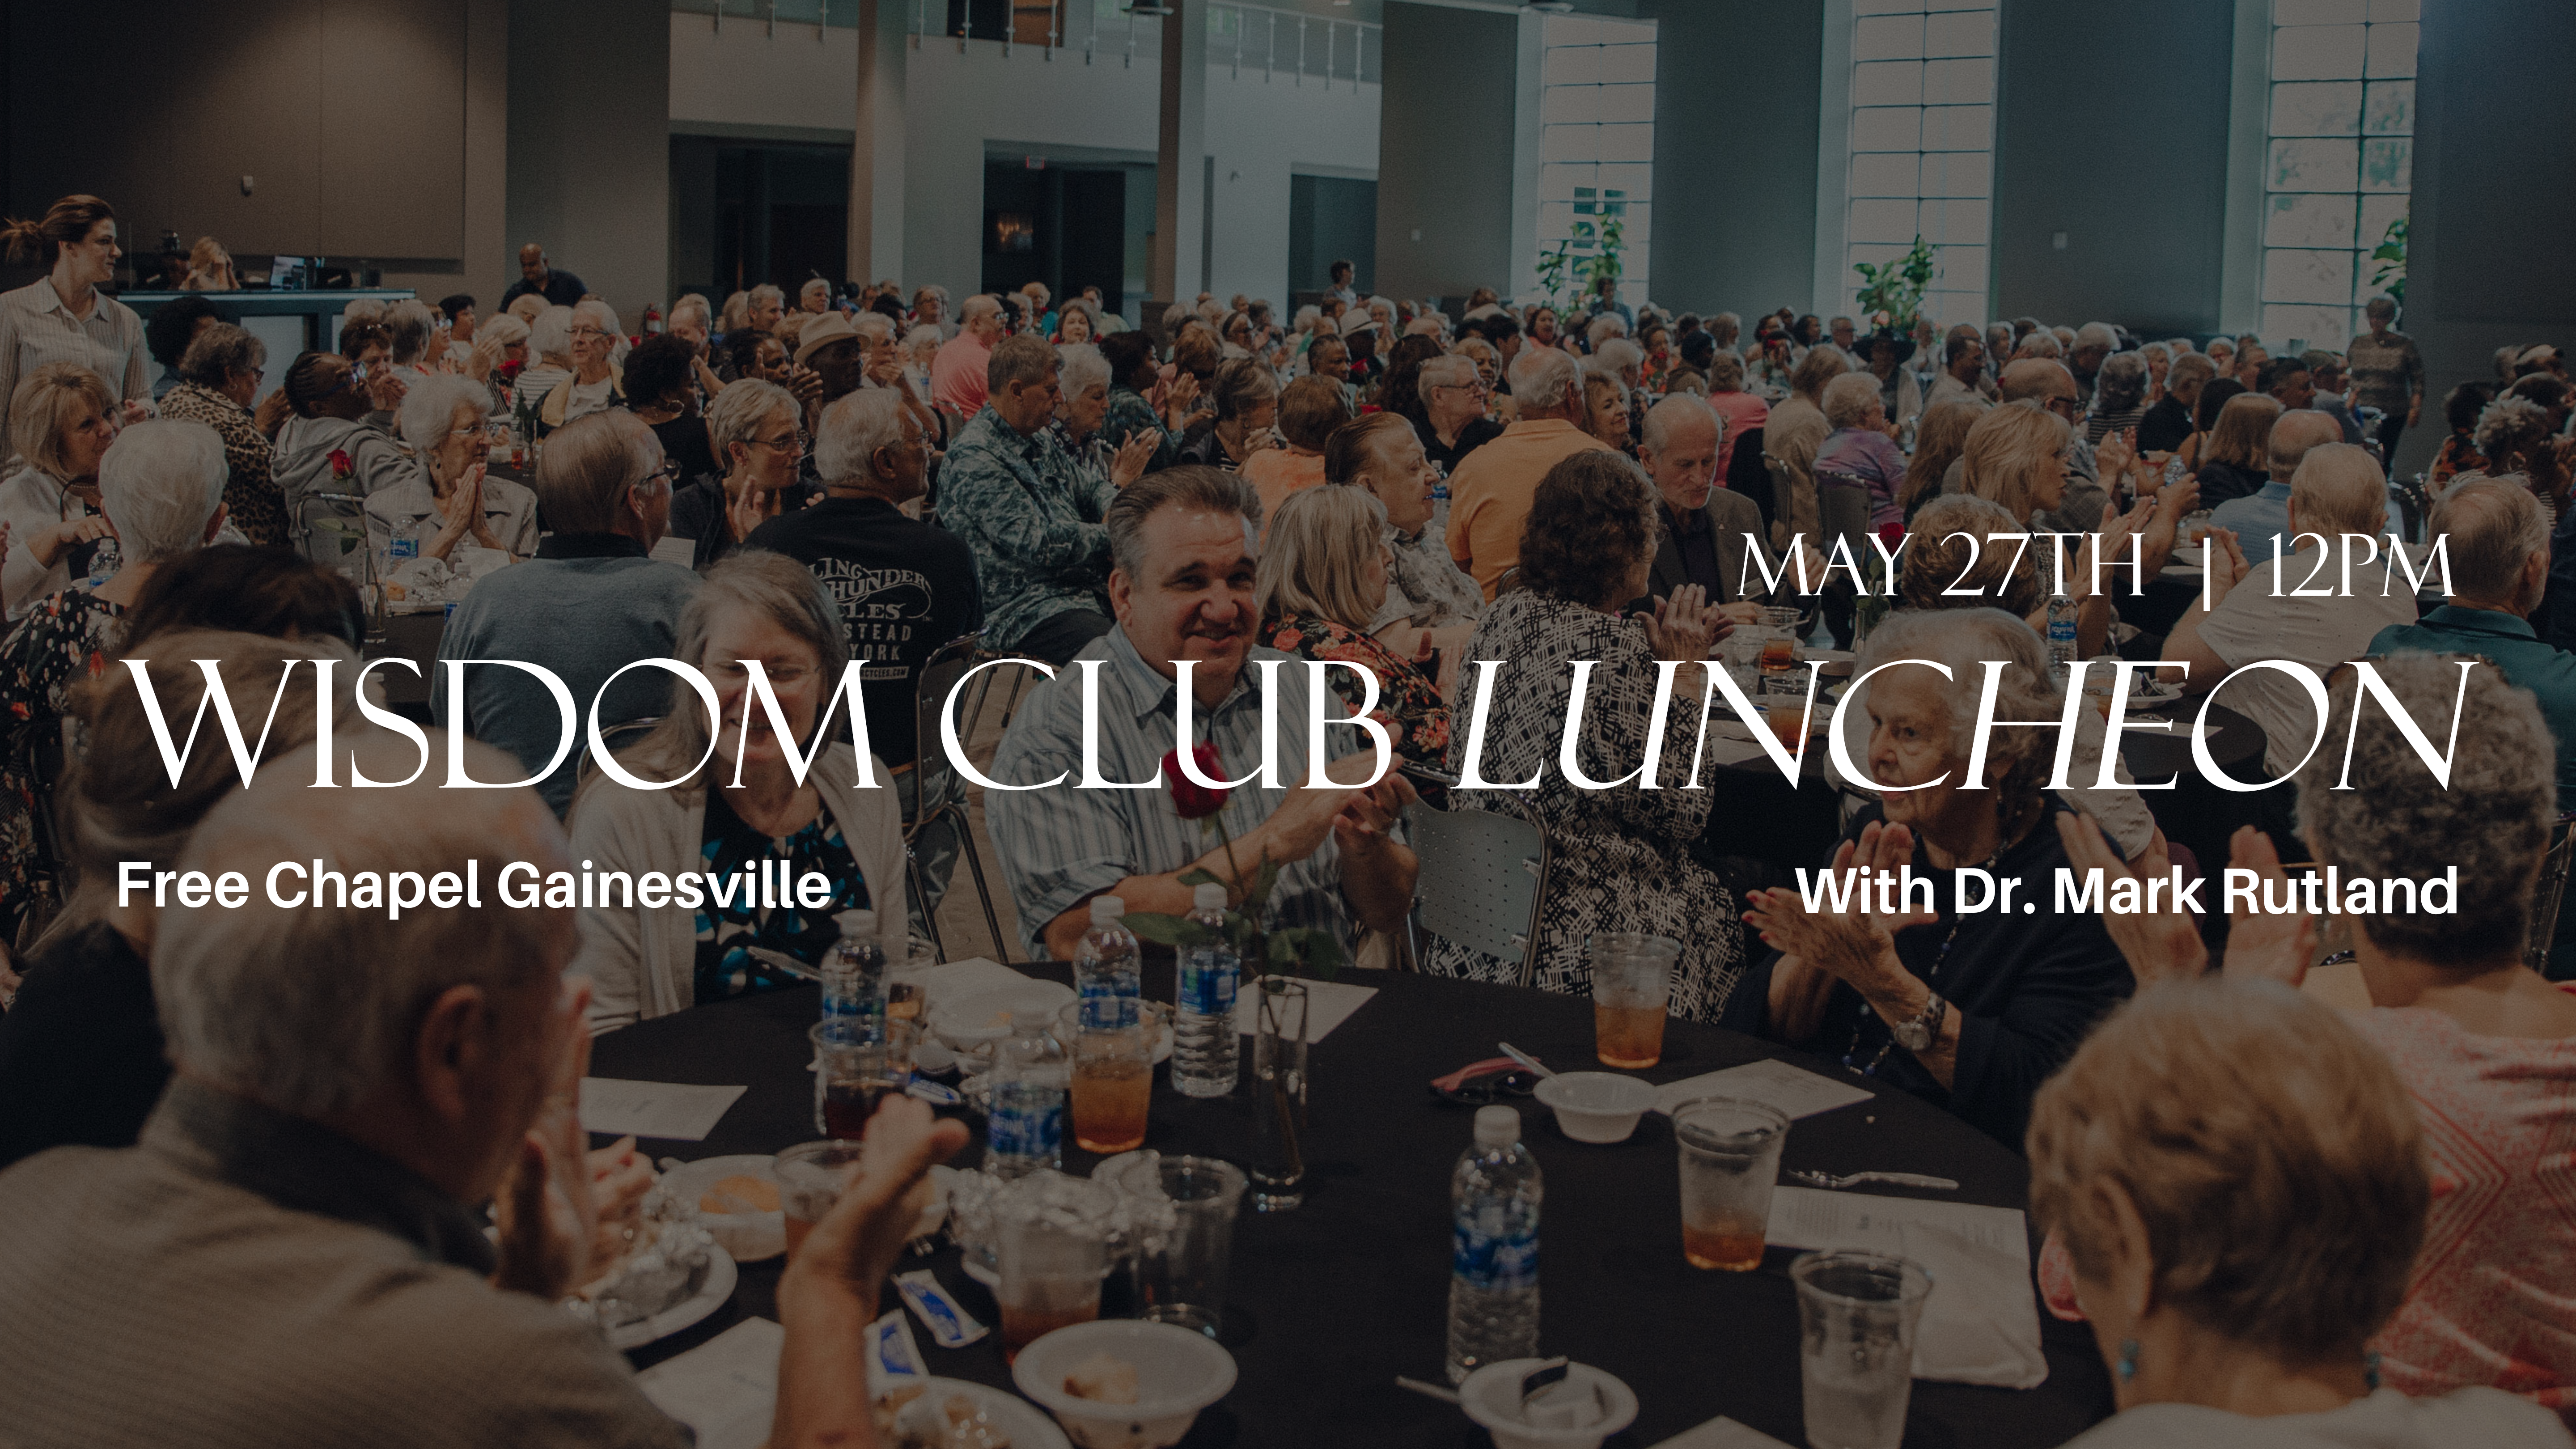 Wisdom Club Luncheon at the Braselton campus